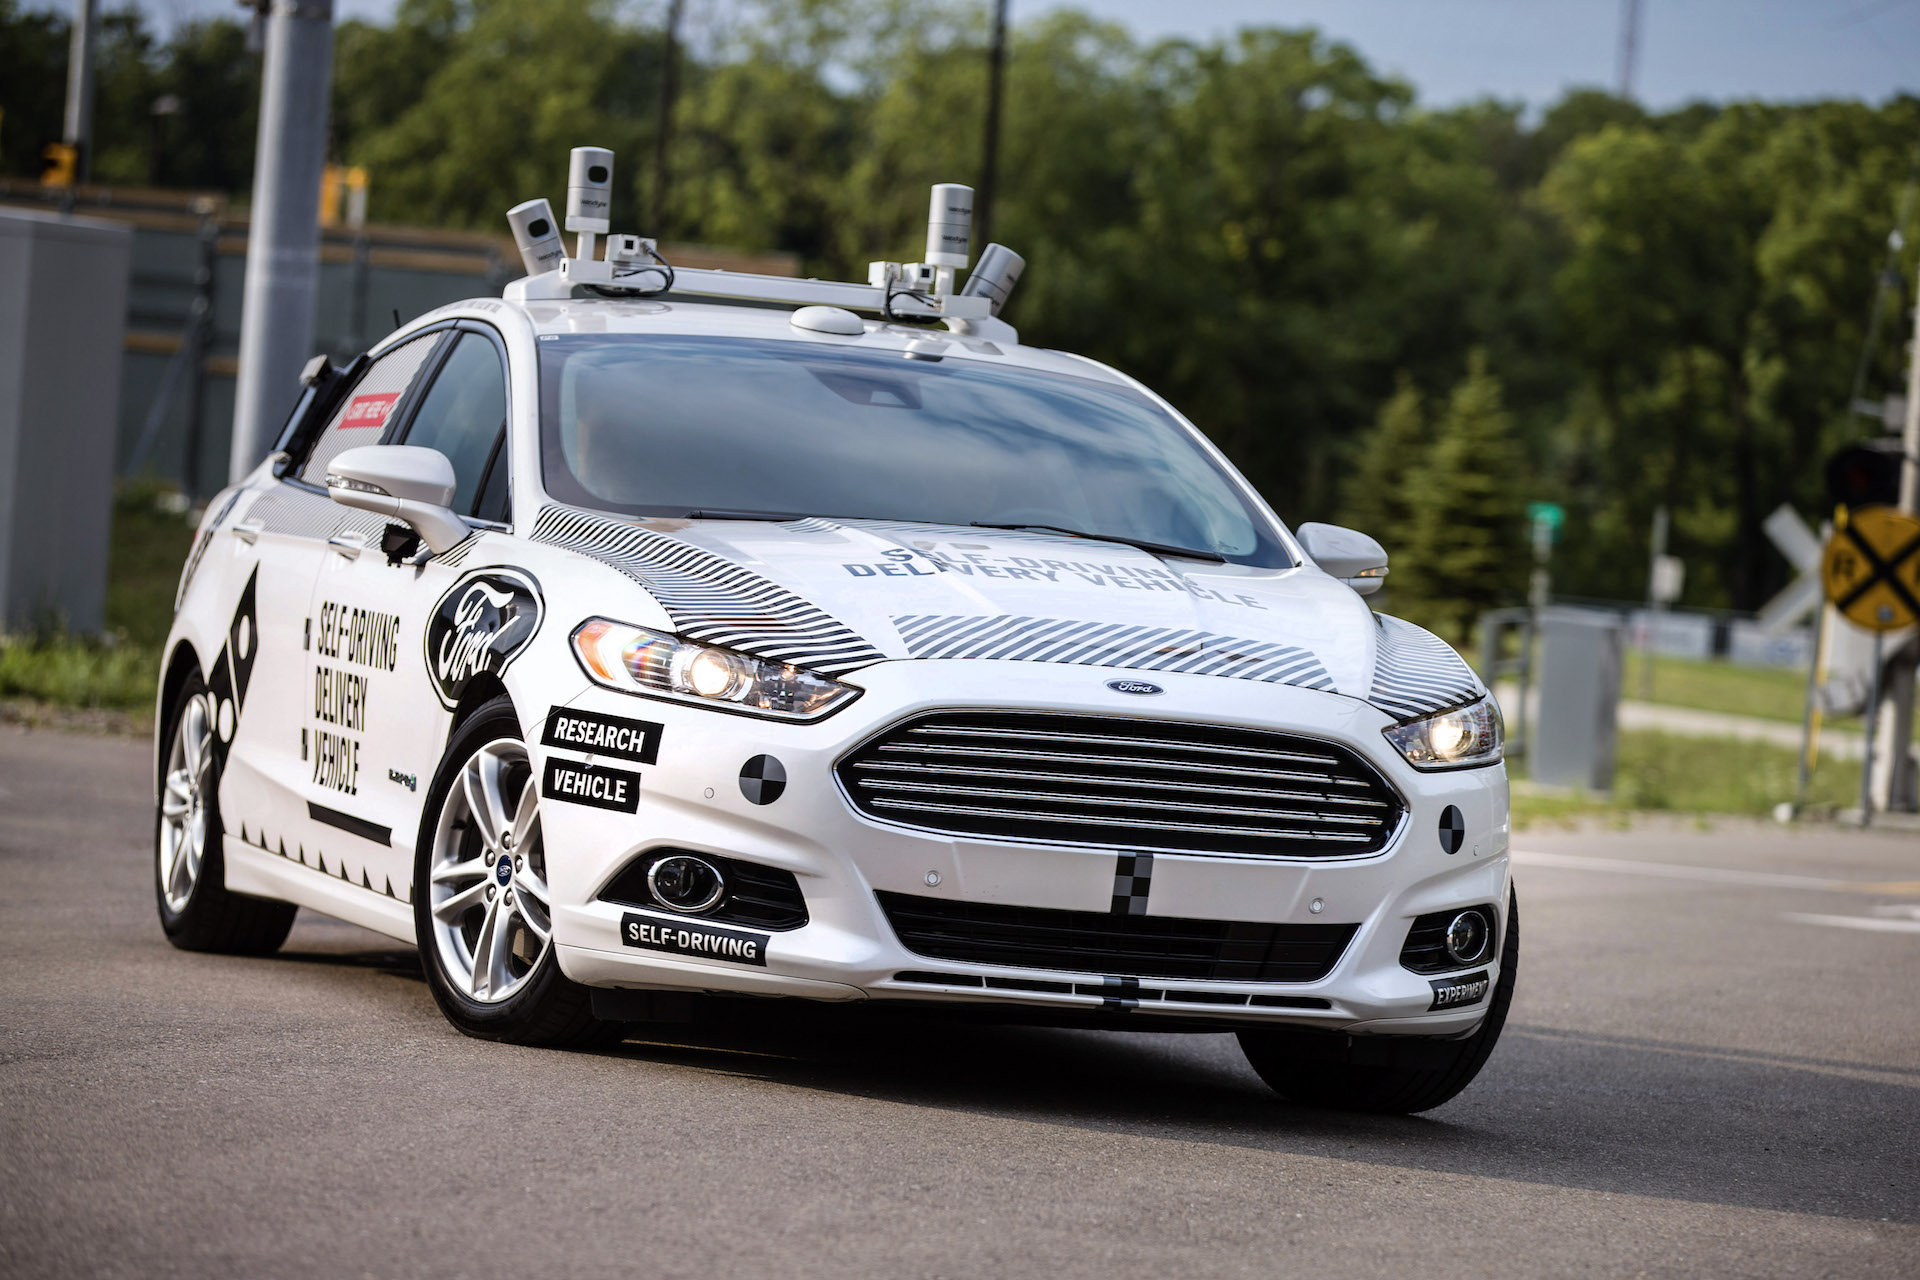 Ford Toyota Gm And Sae Collaborate On Standards For Self Driving Cars